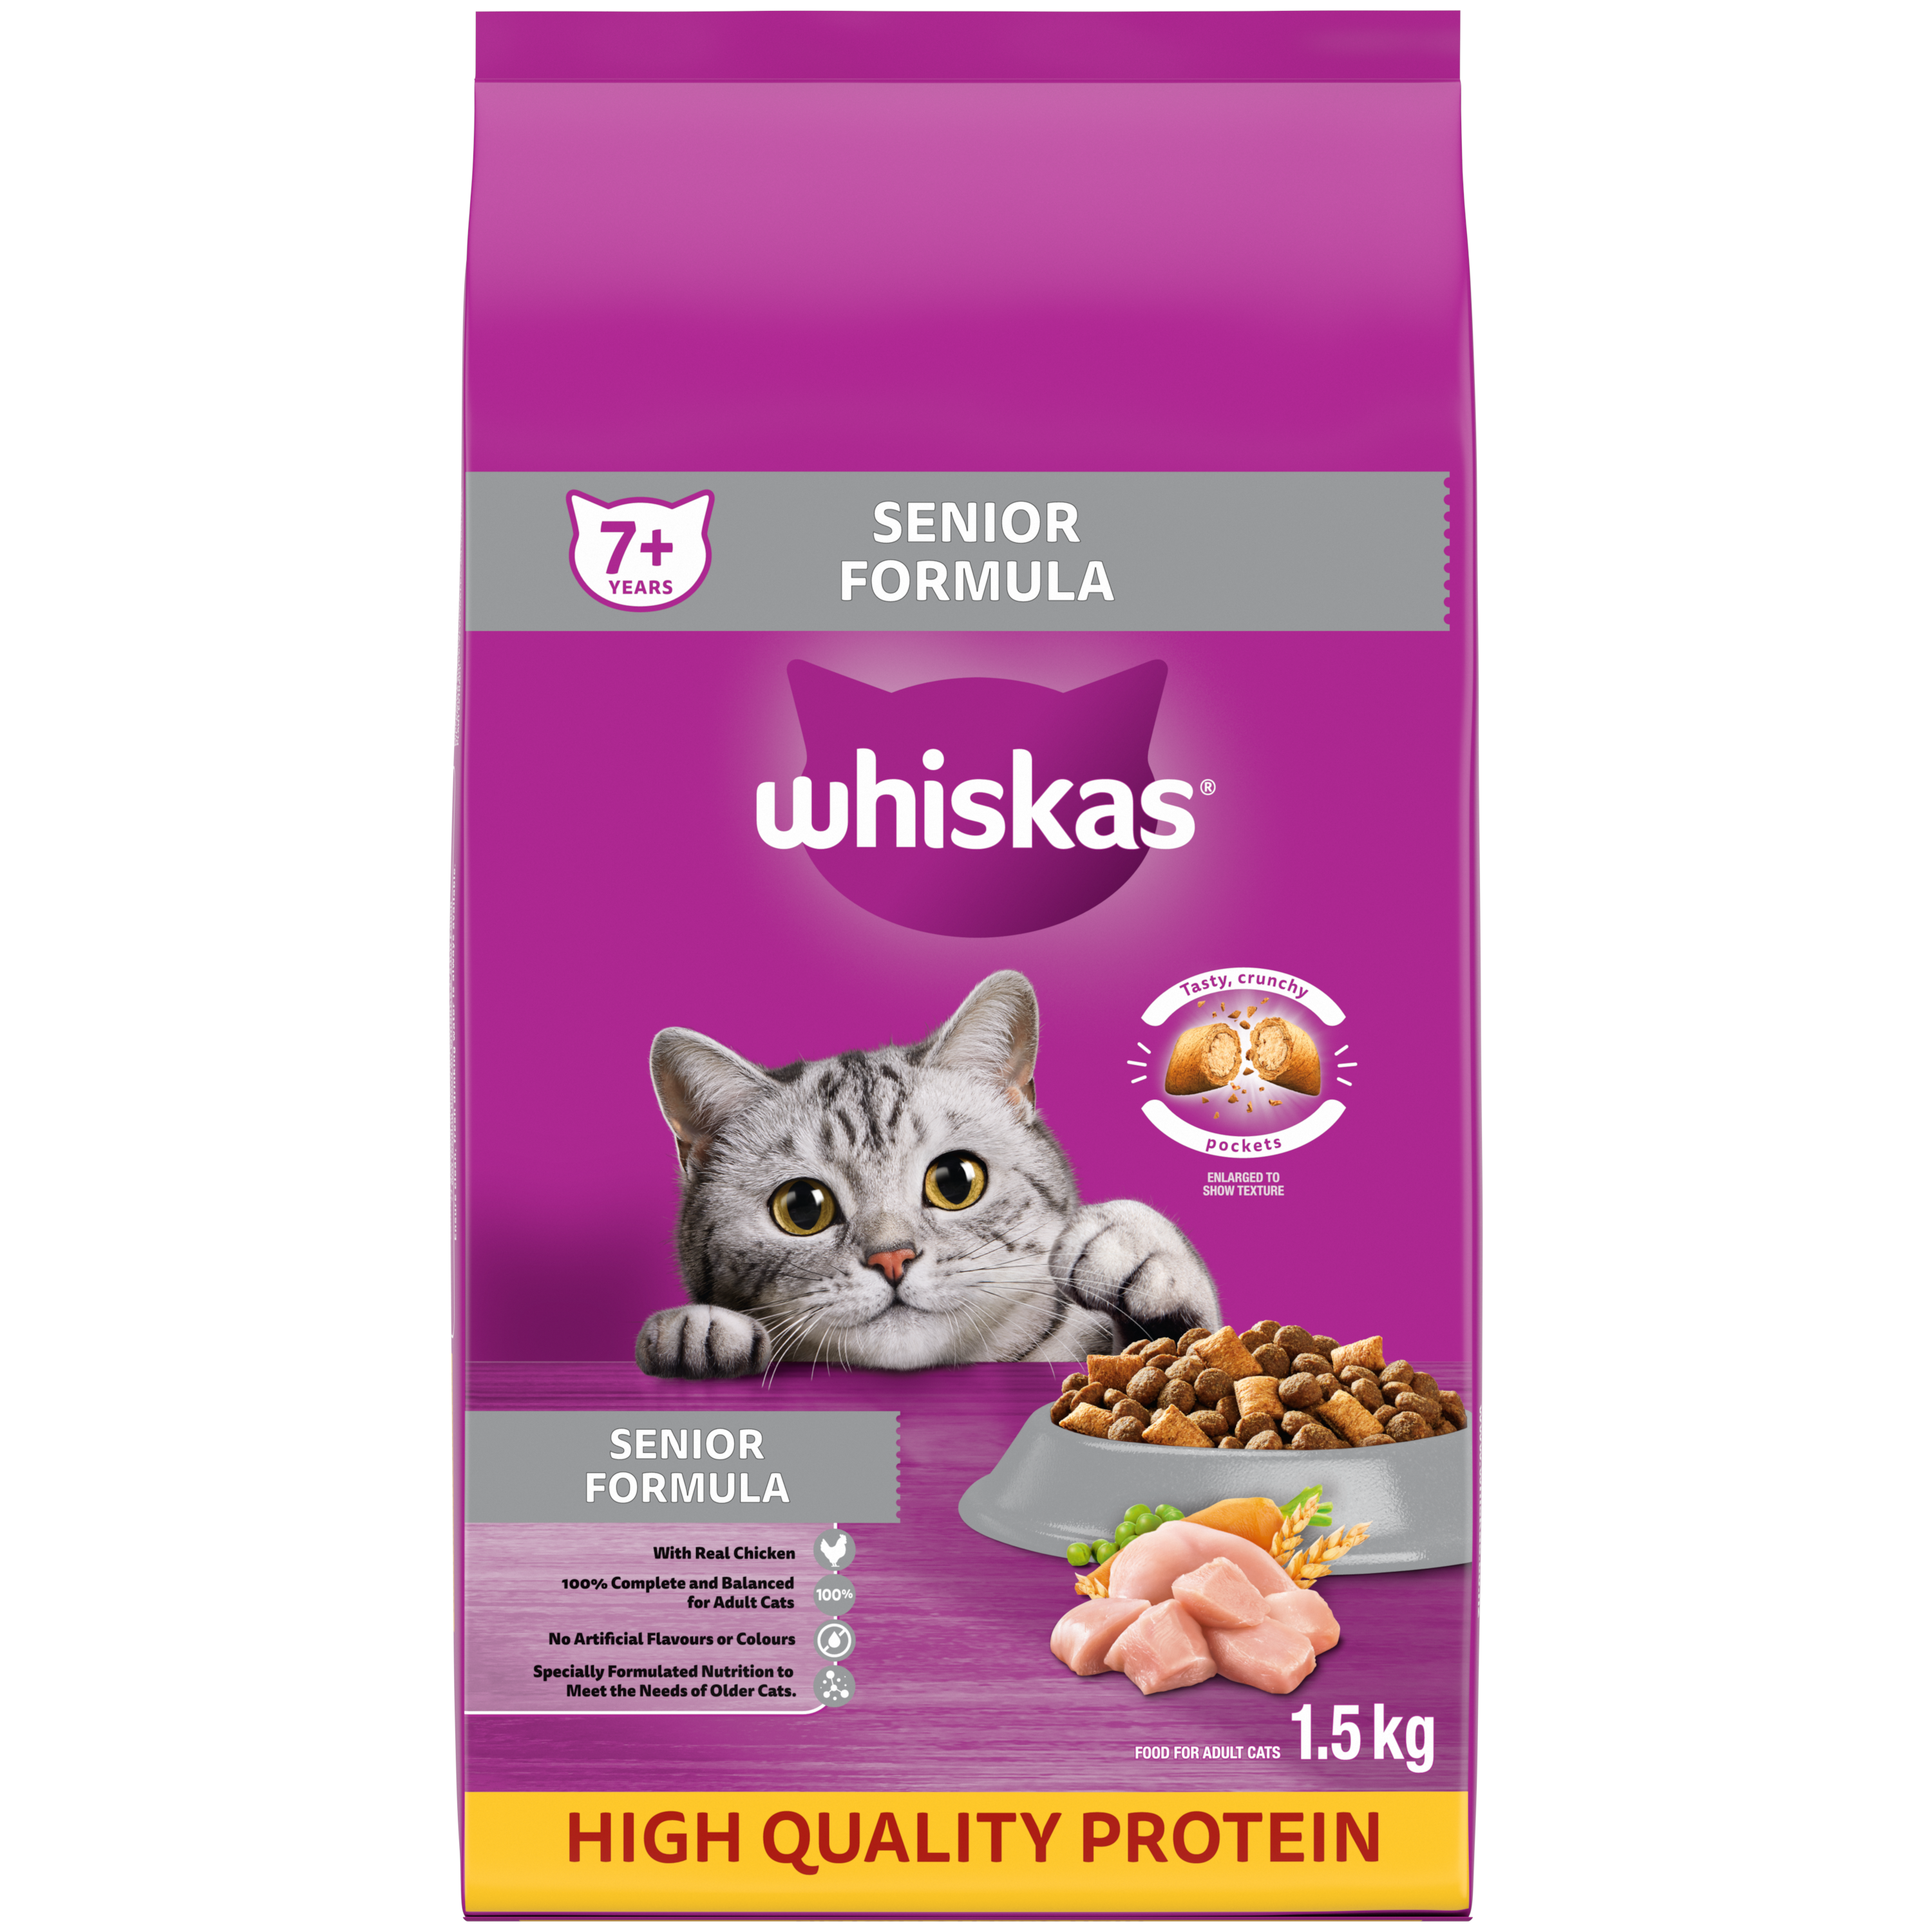 WHISKAS® Senior Dry Cat Food with Chicken 1.5kg Bag image